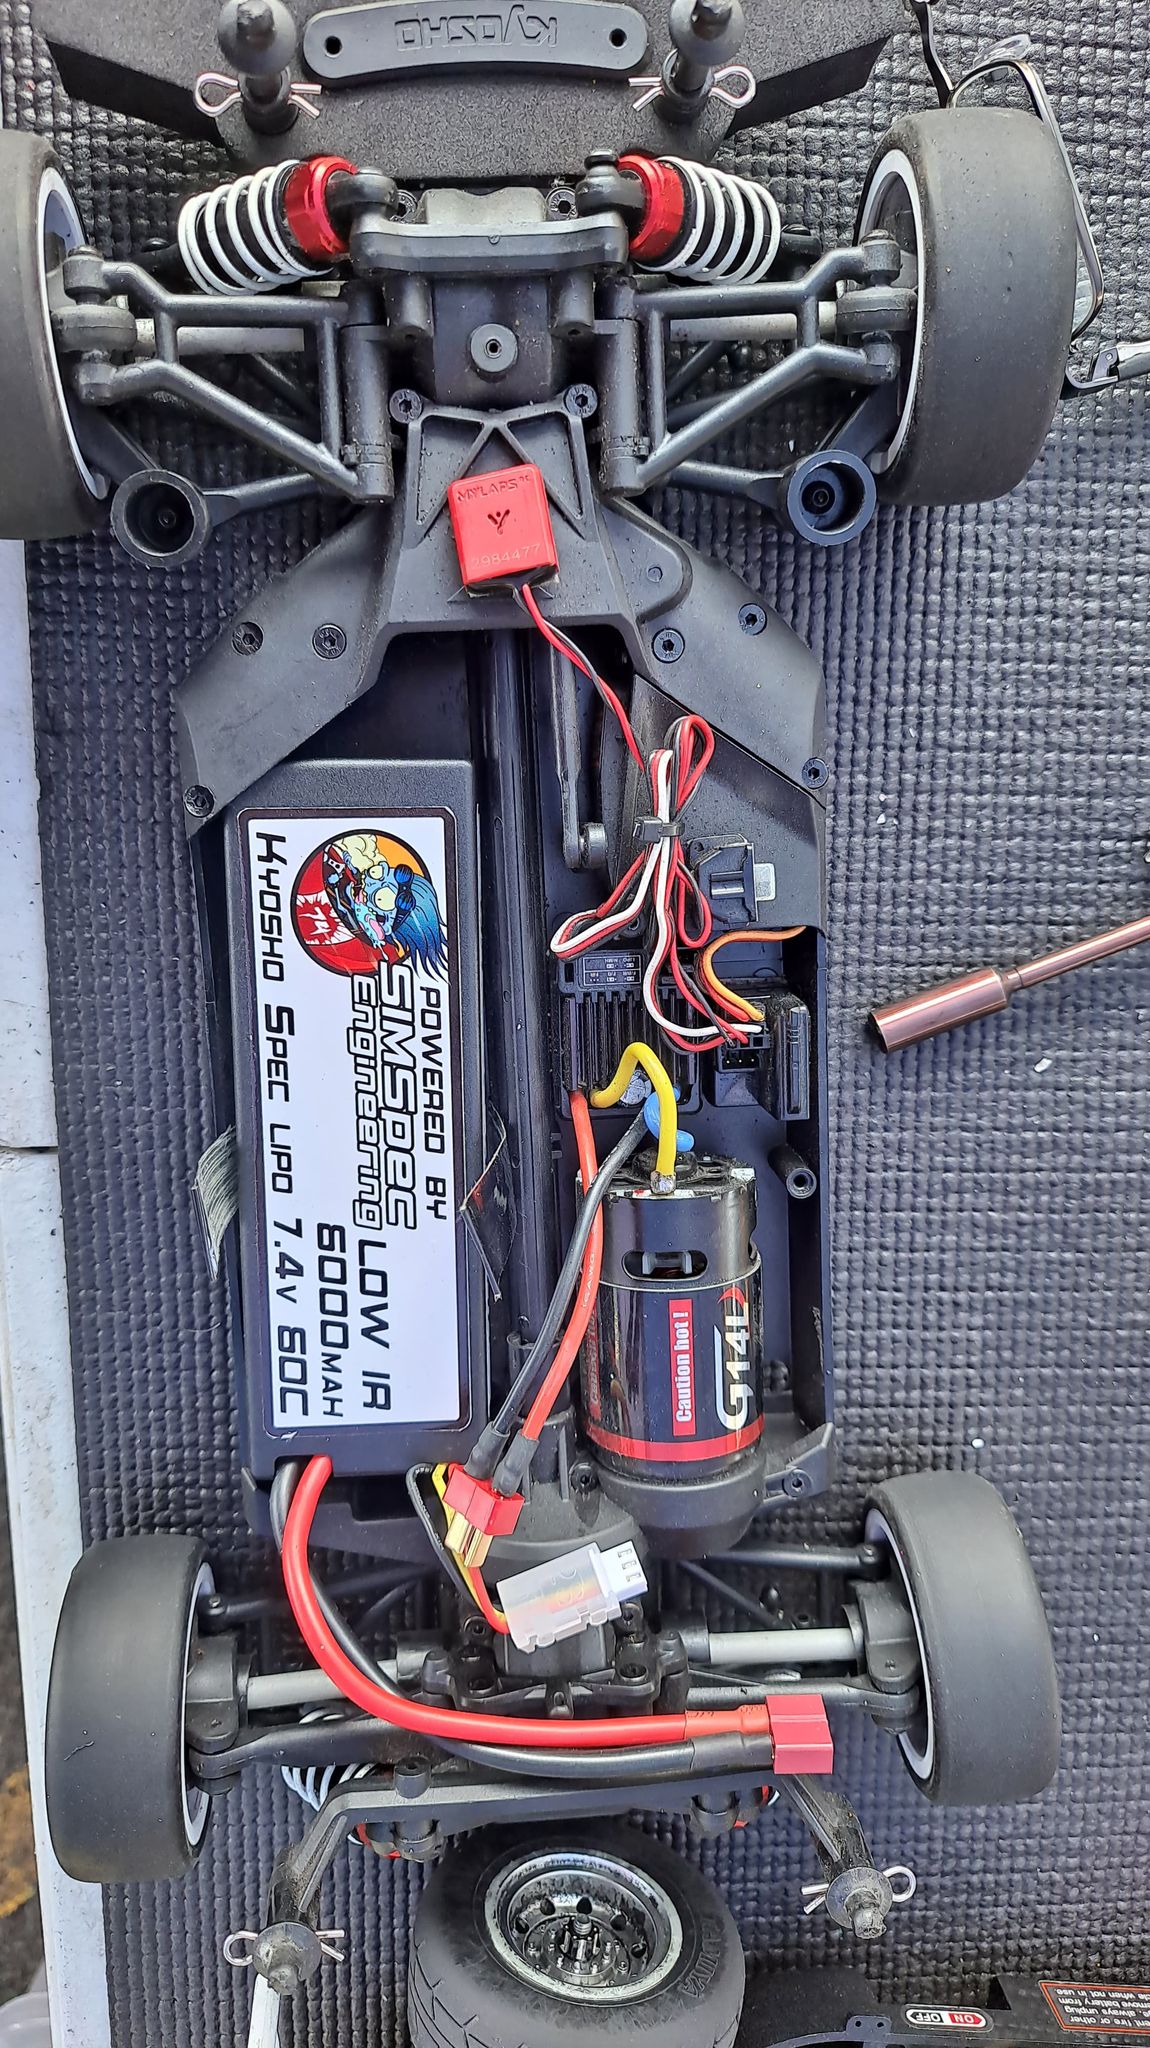 Powered by: SIMSpec Kyosho Racing Spec Lipo 6000mah